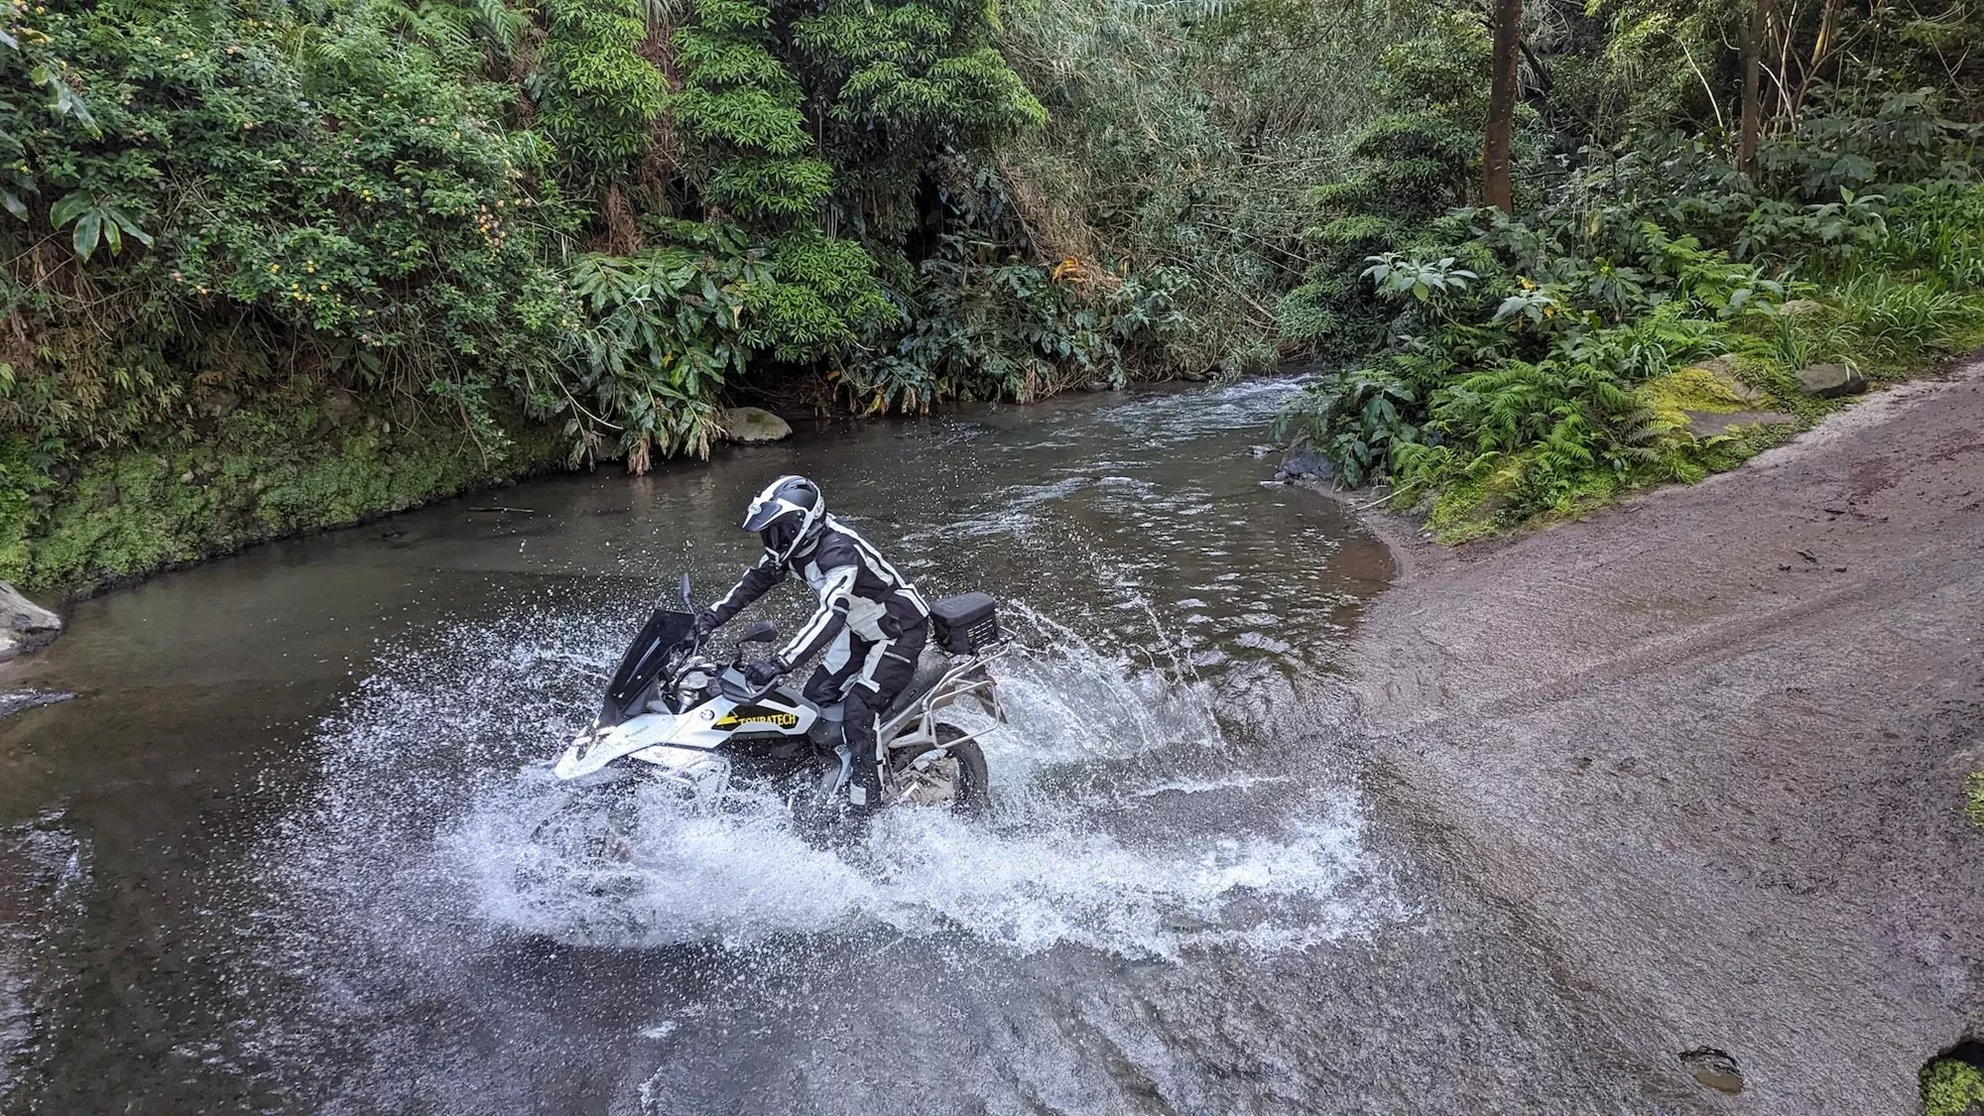 Varied adventures in the saddle of the BMW R 1300 GS